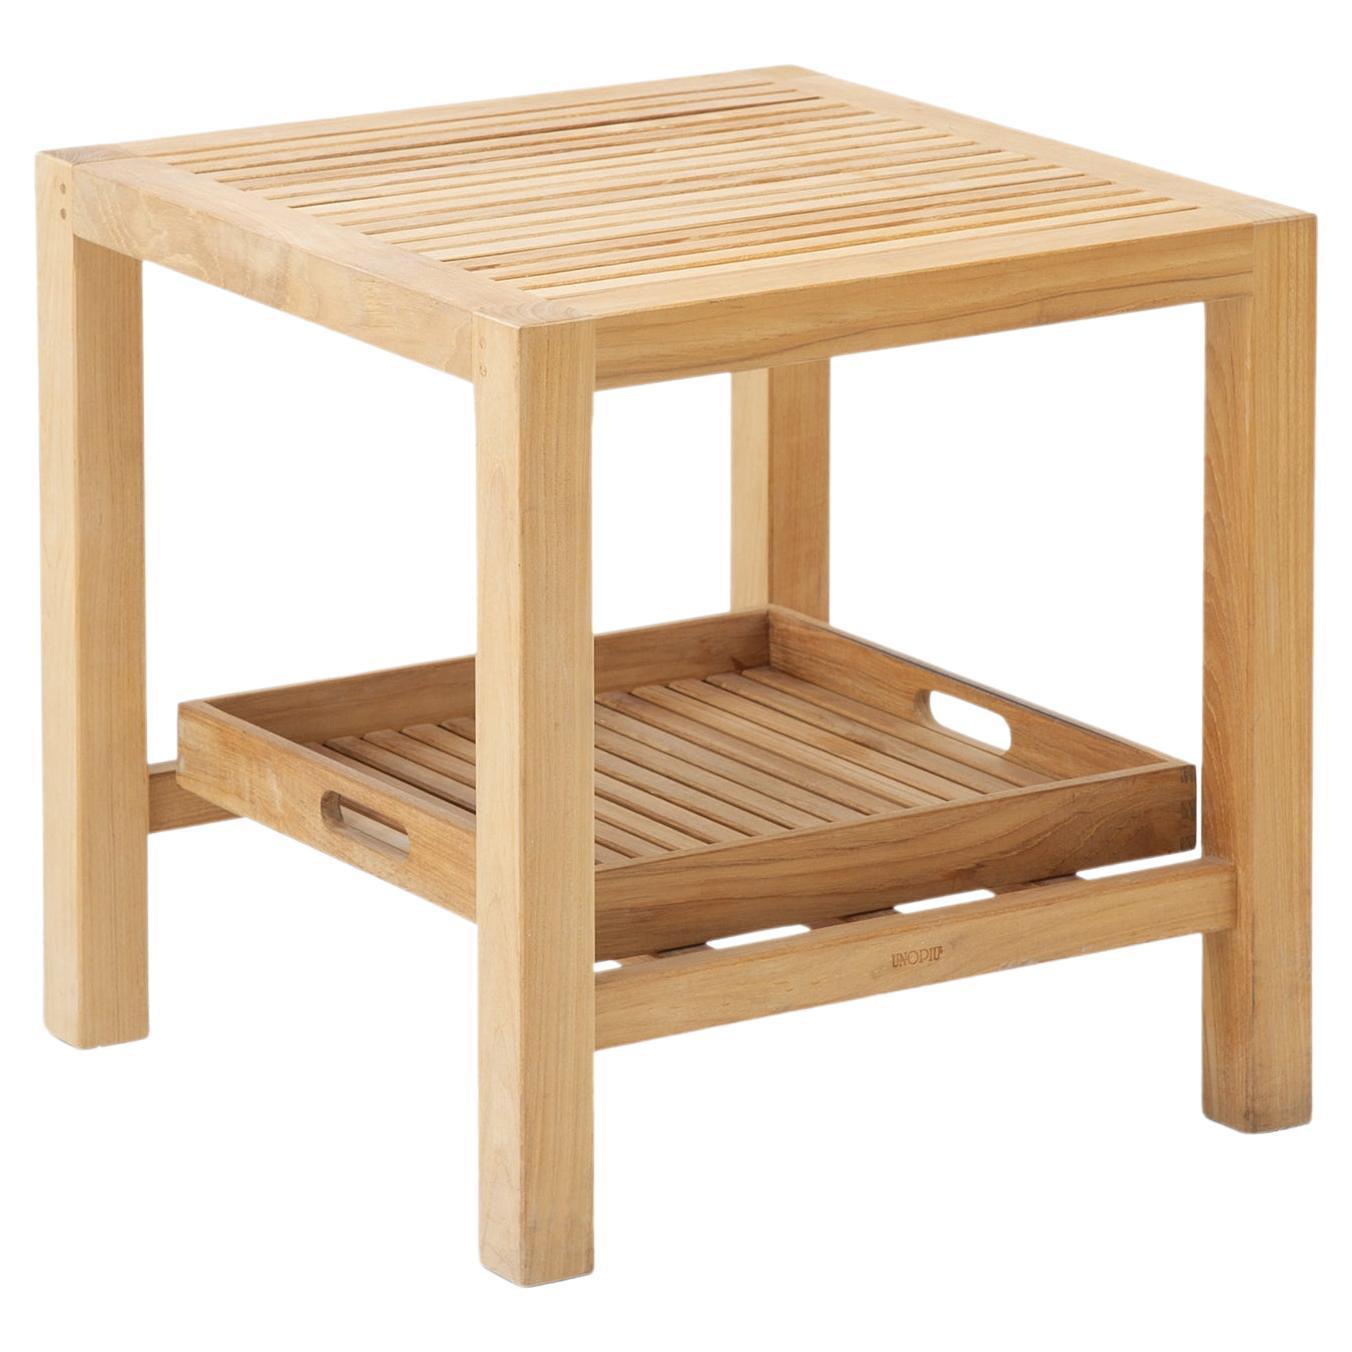 Unopiu' Chelsea Coffee Table Square Outdoor Collection For Sale